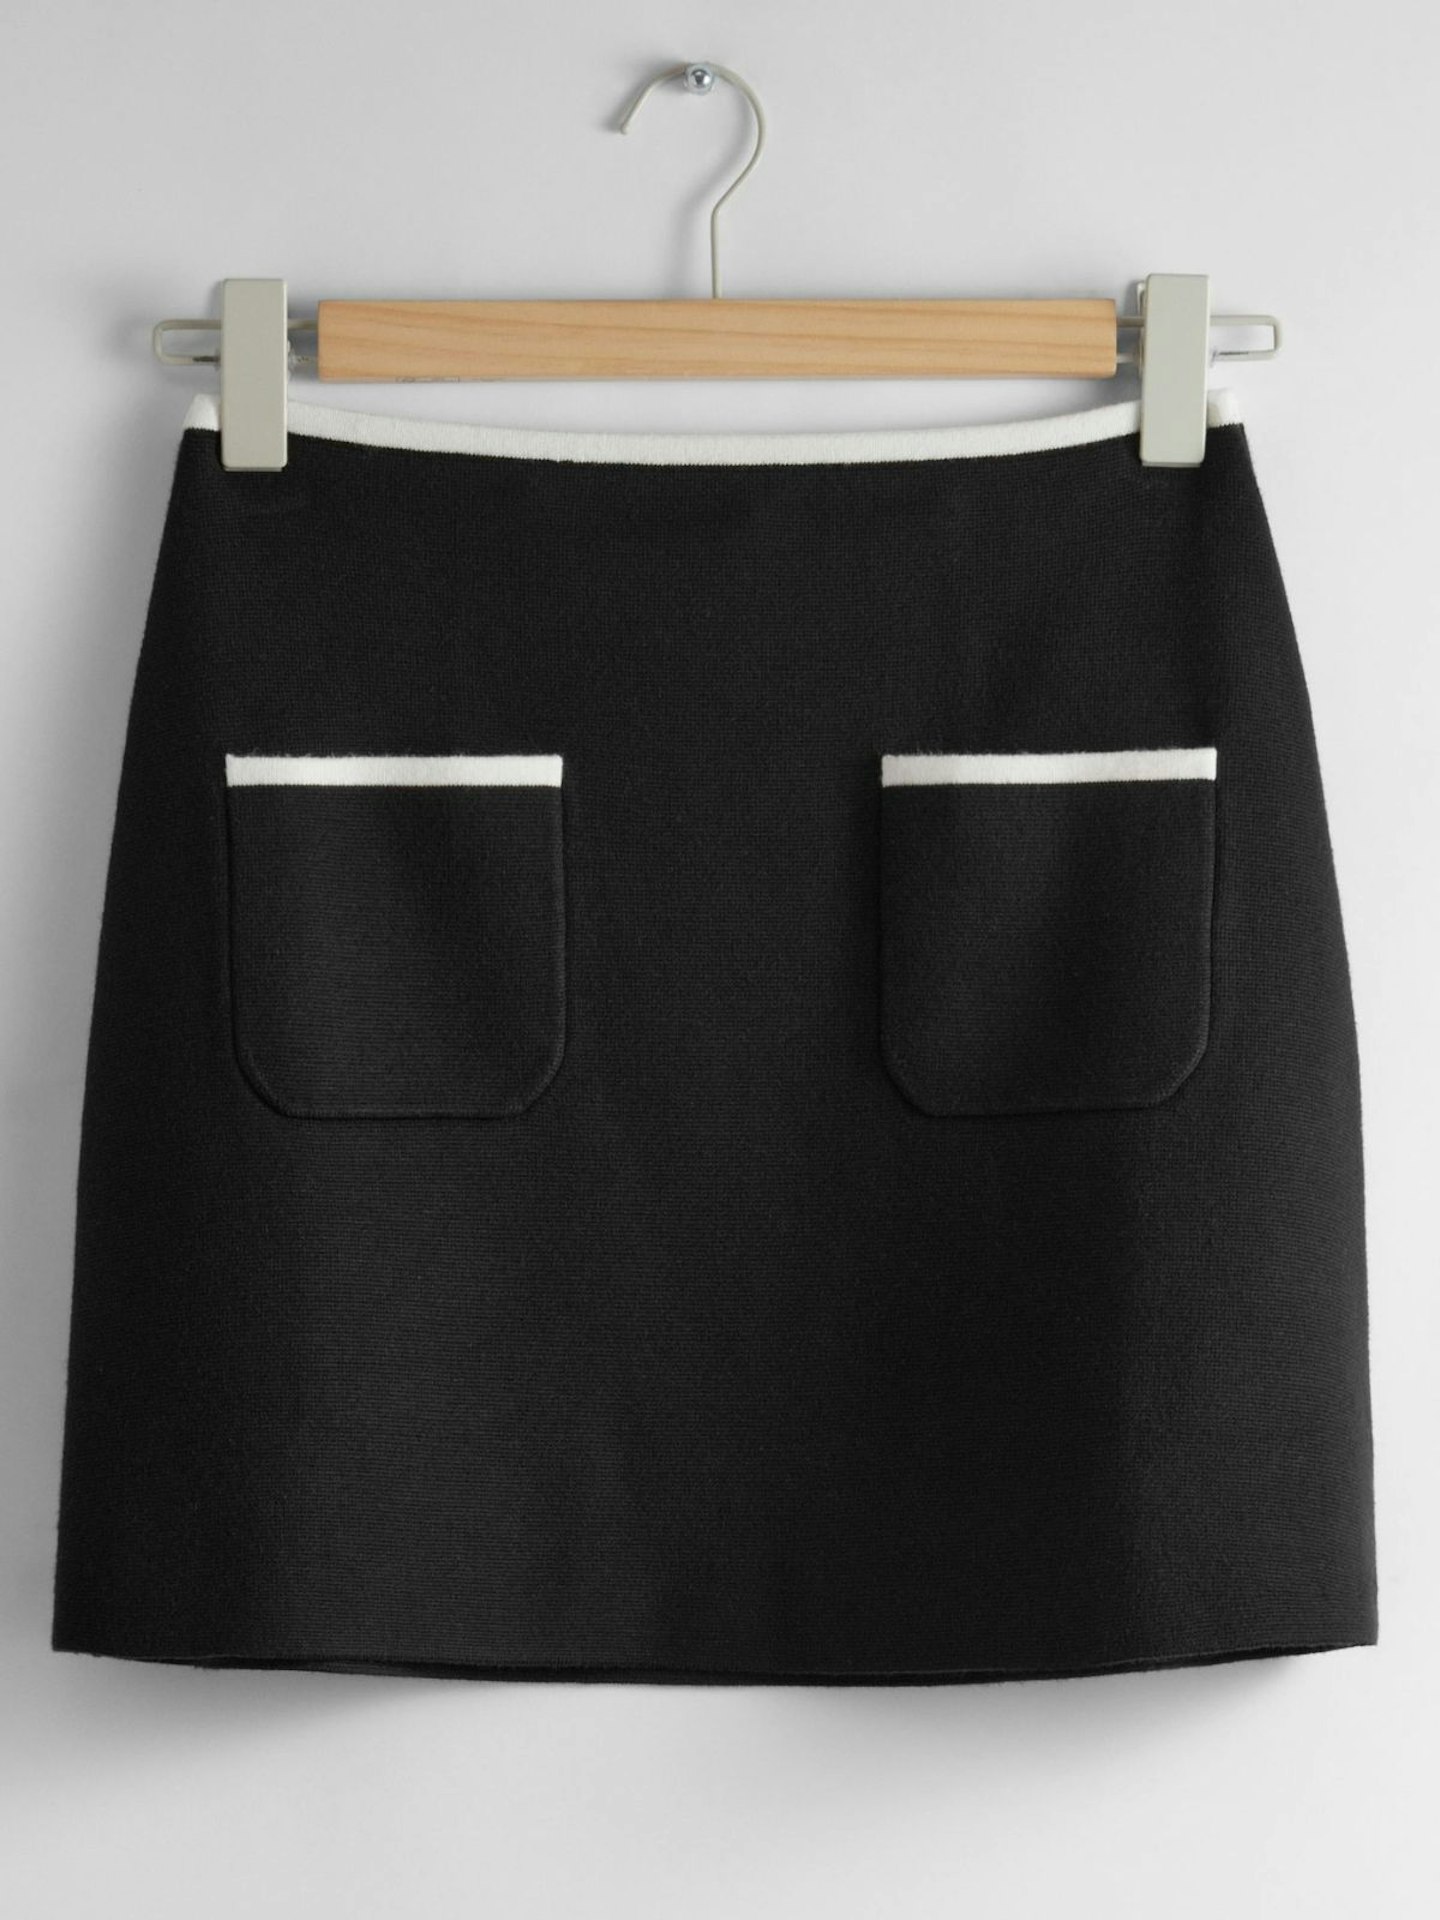 & Other Stories Patch Pocket Mini Skirt